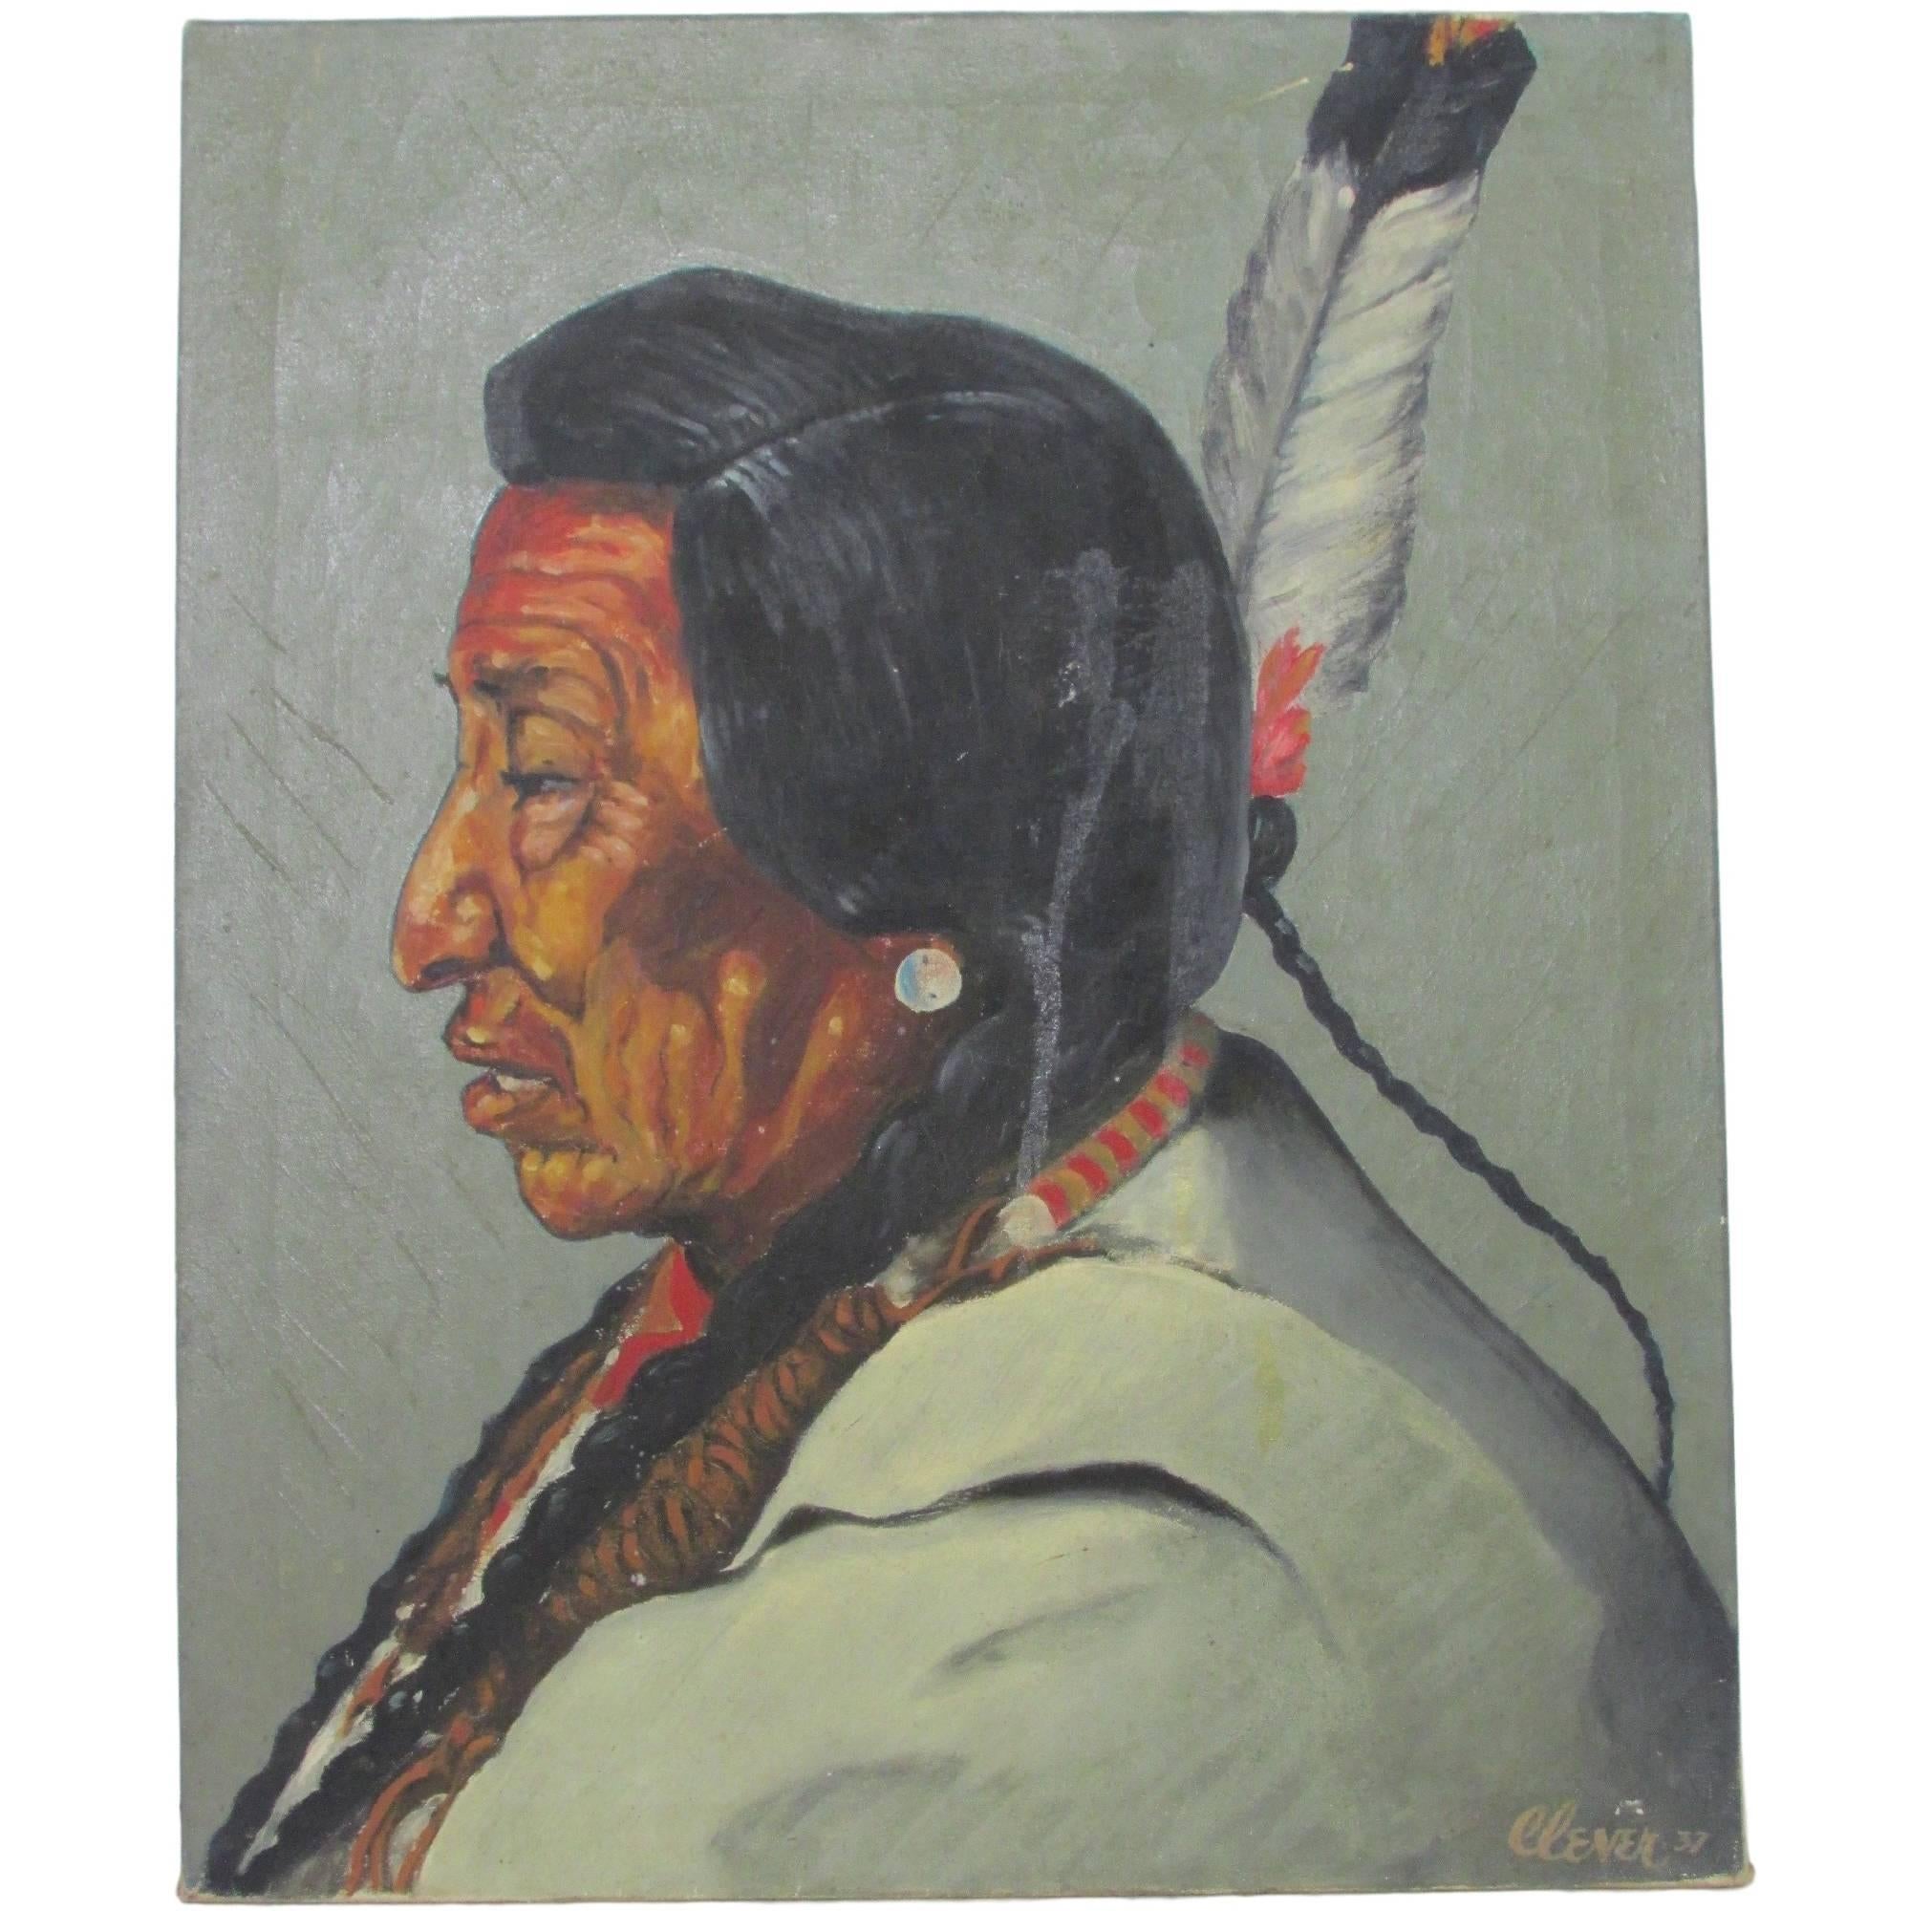 Blackfoot "Pecunnie" Native American Oil on Canvas by Don Clever 